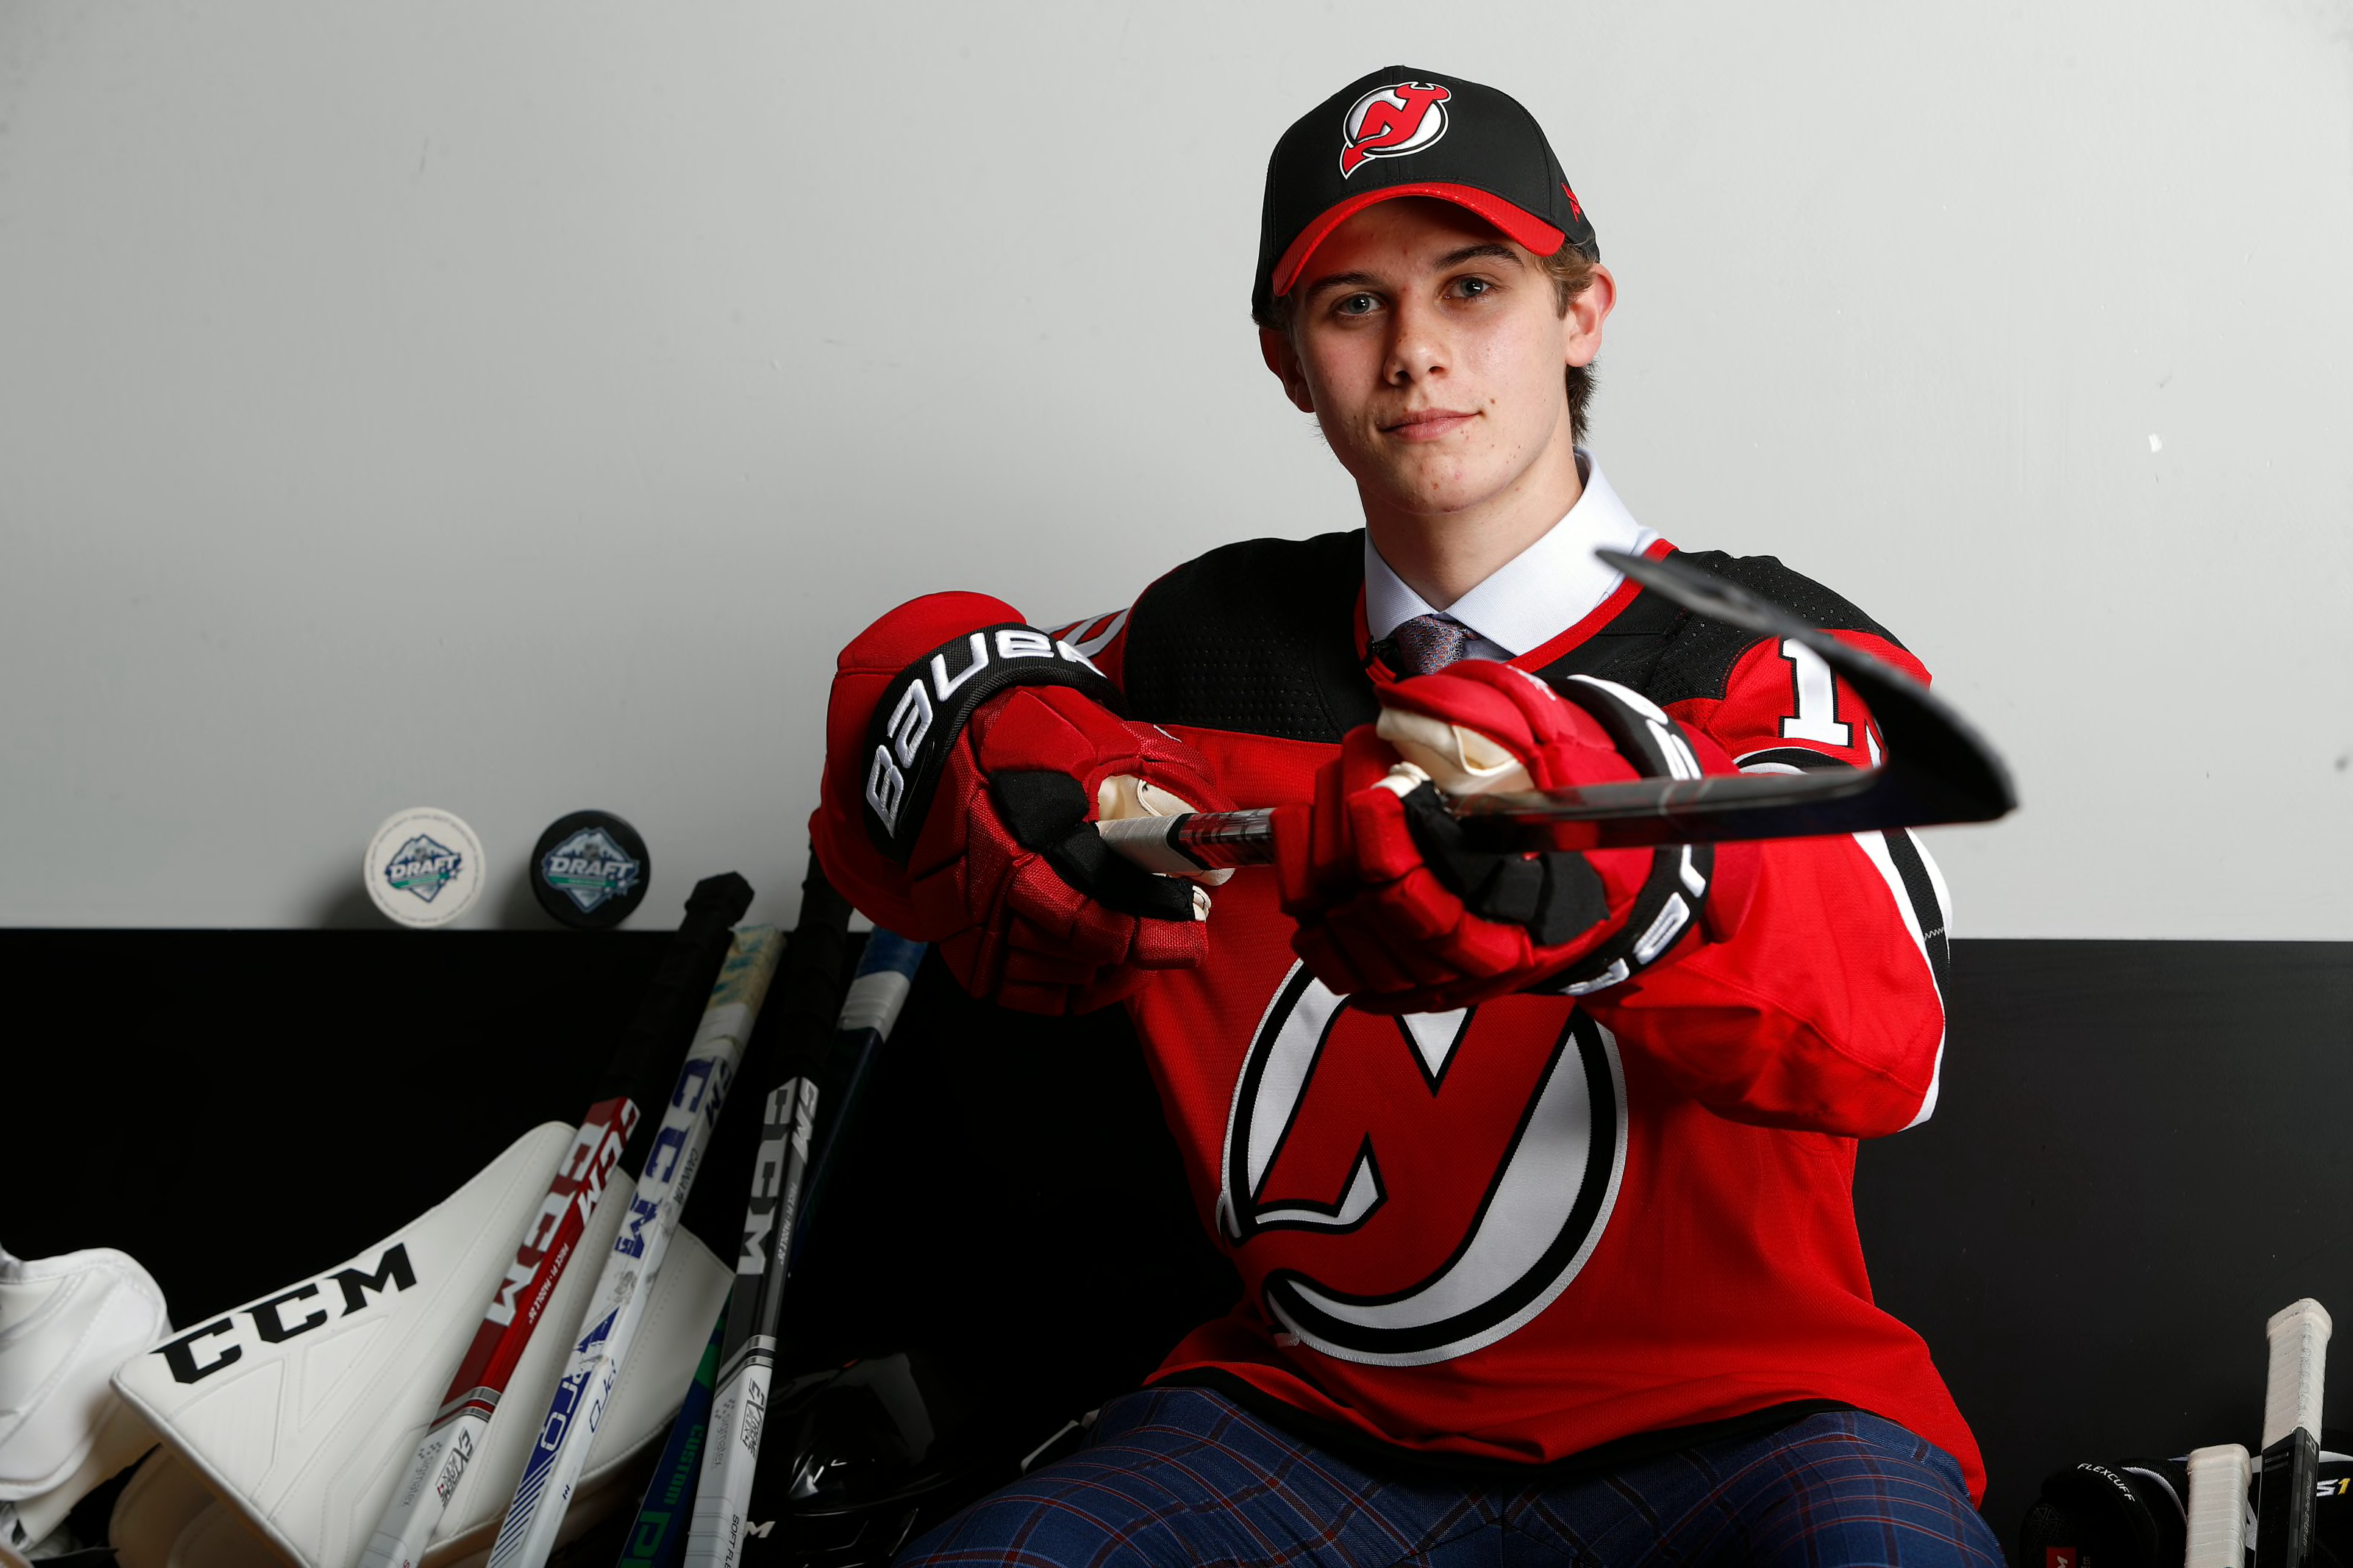 New Jersey Devils Prospect Update: Luke Hughes Signs! And the